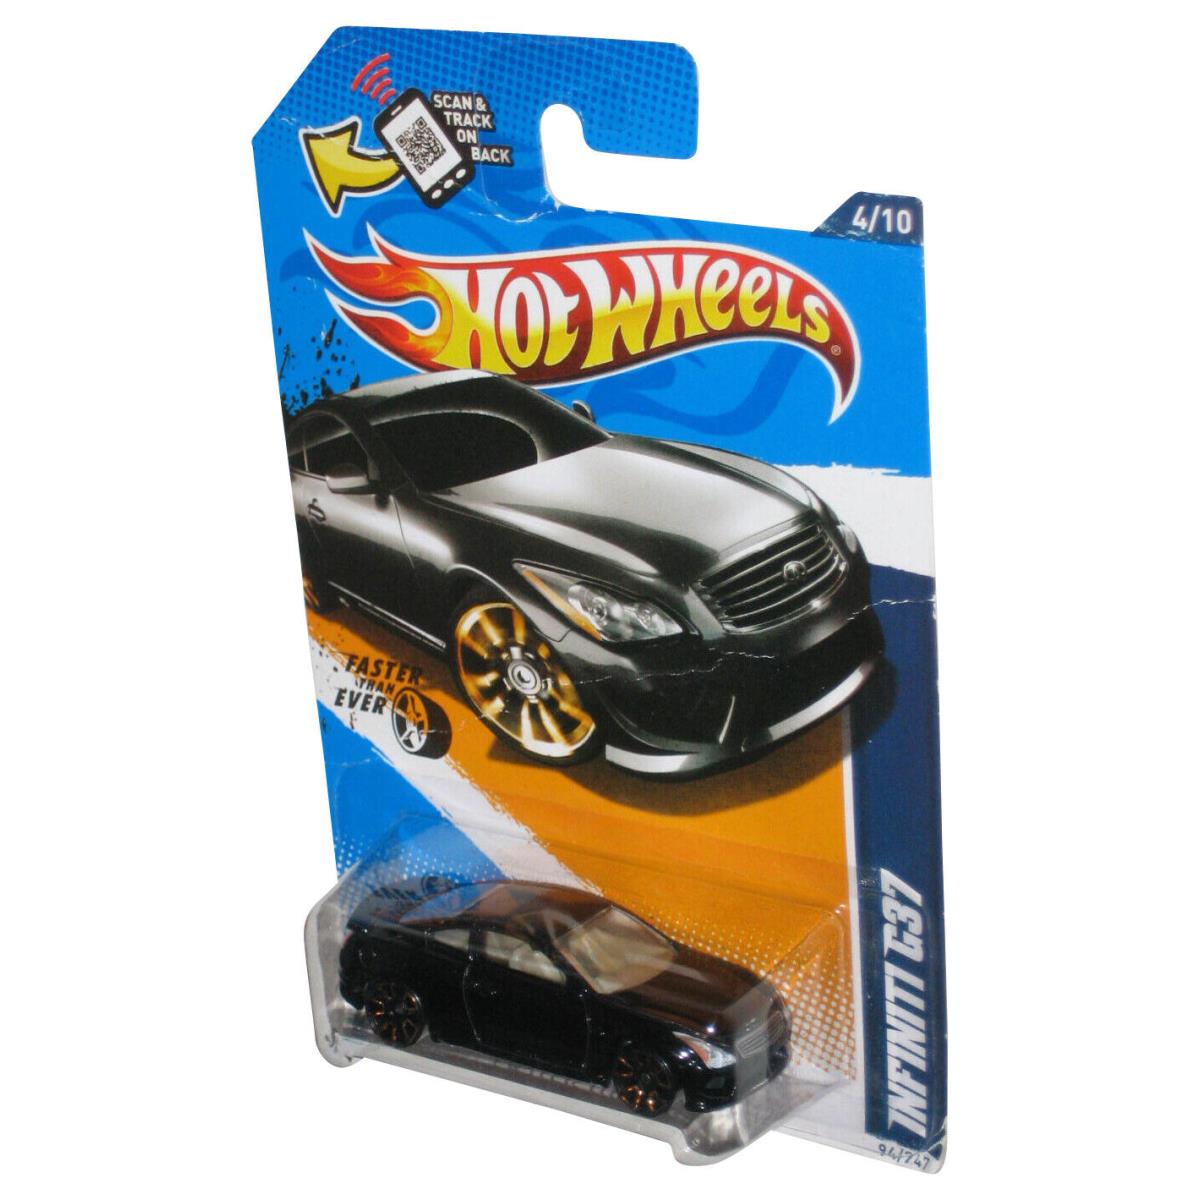 Hot Wheels Faster Than Ever `12 4/10 2011 Black Infinity G37 Car 94/247